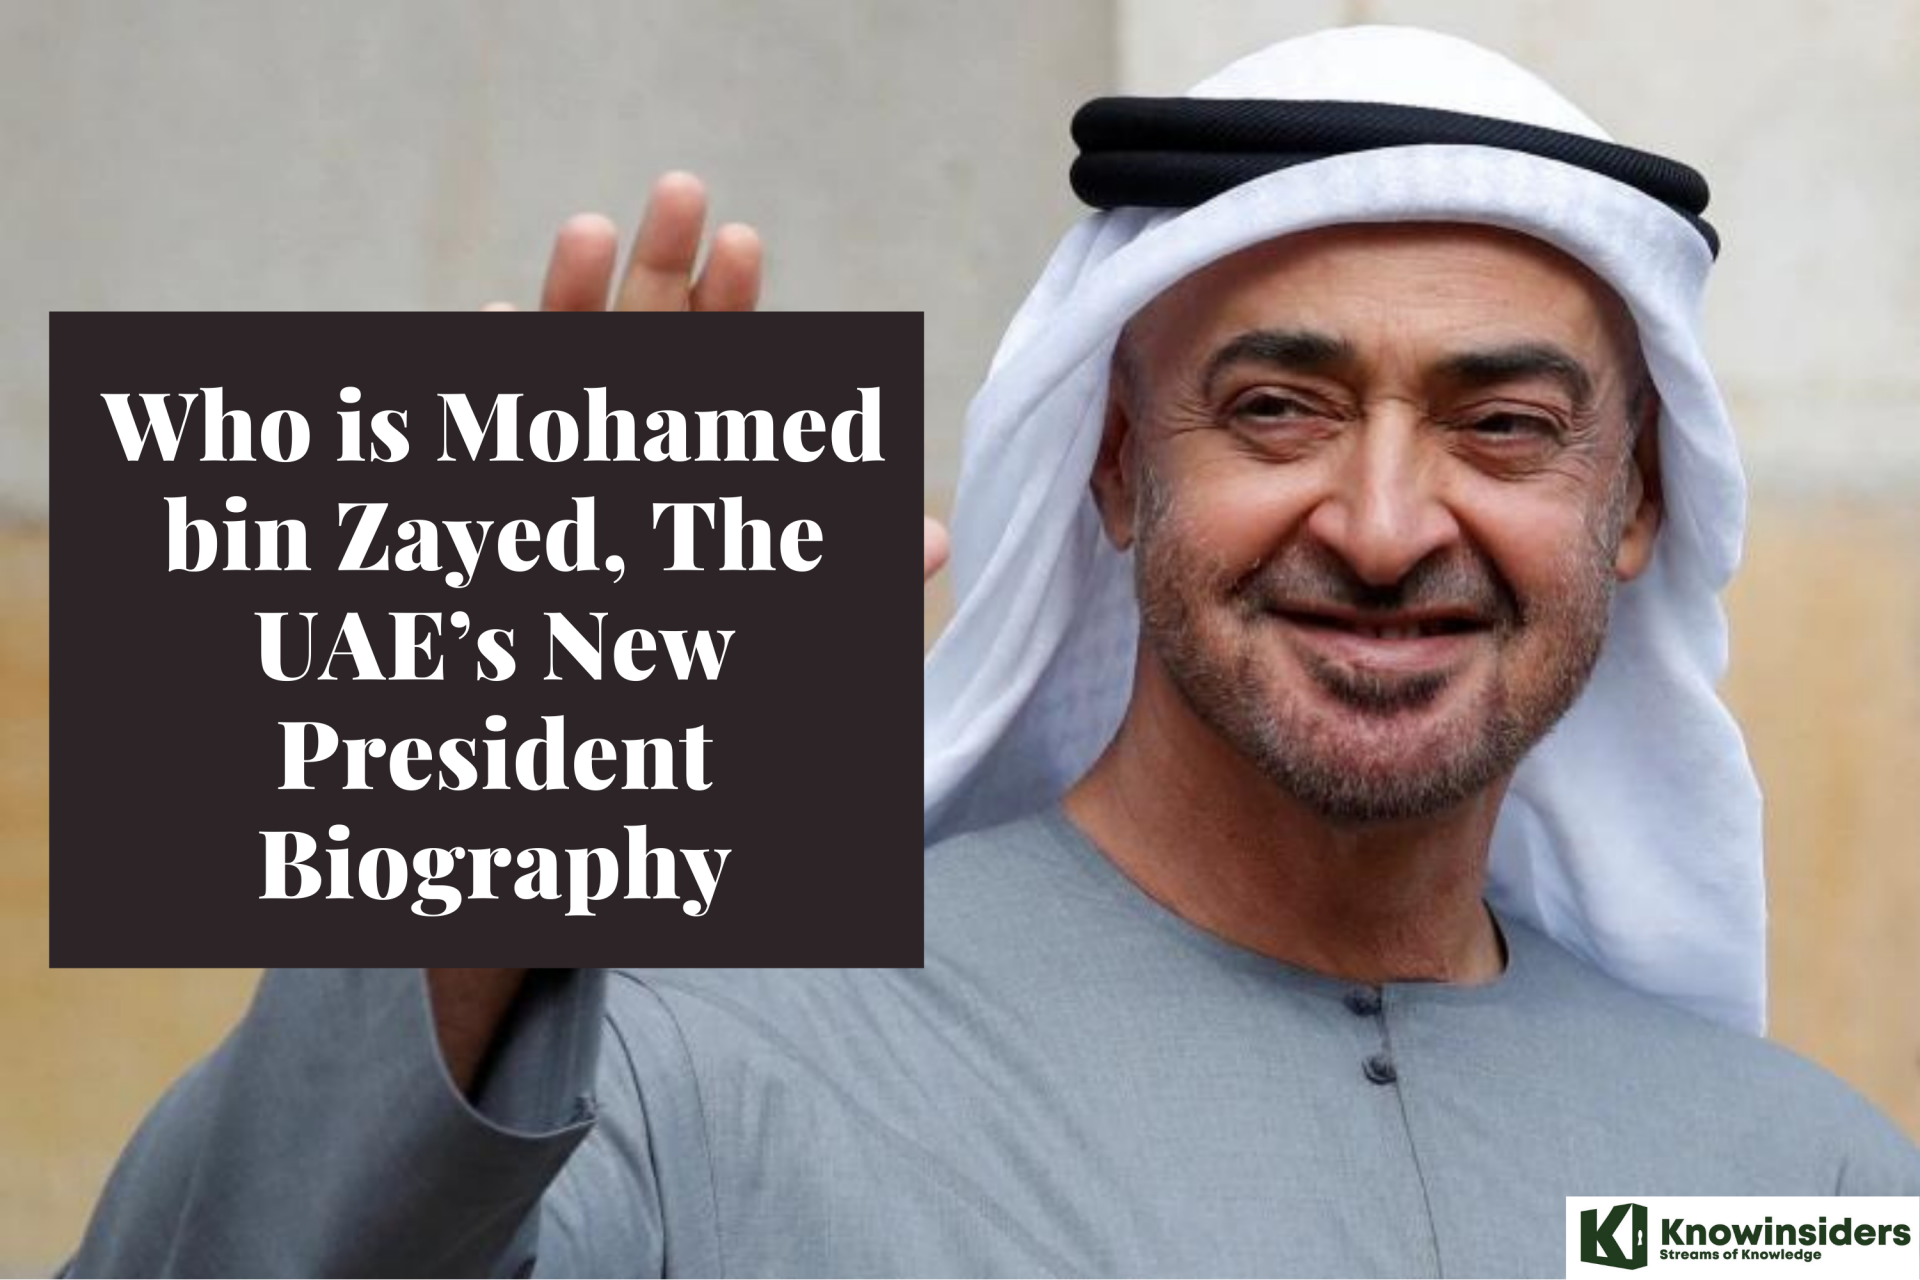 Mohamed bin Zayed - UAE’s New President Biography: Early Life, Education, Politician Career, Net Worth